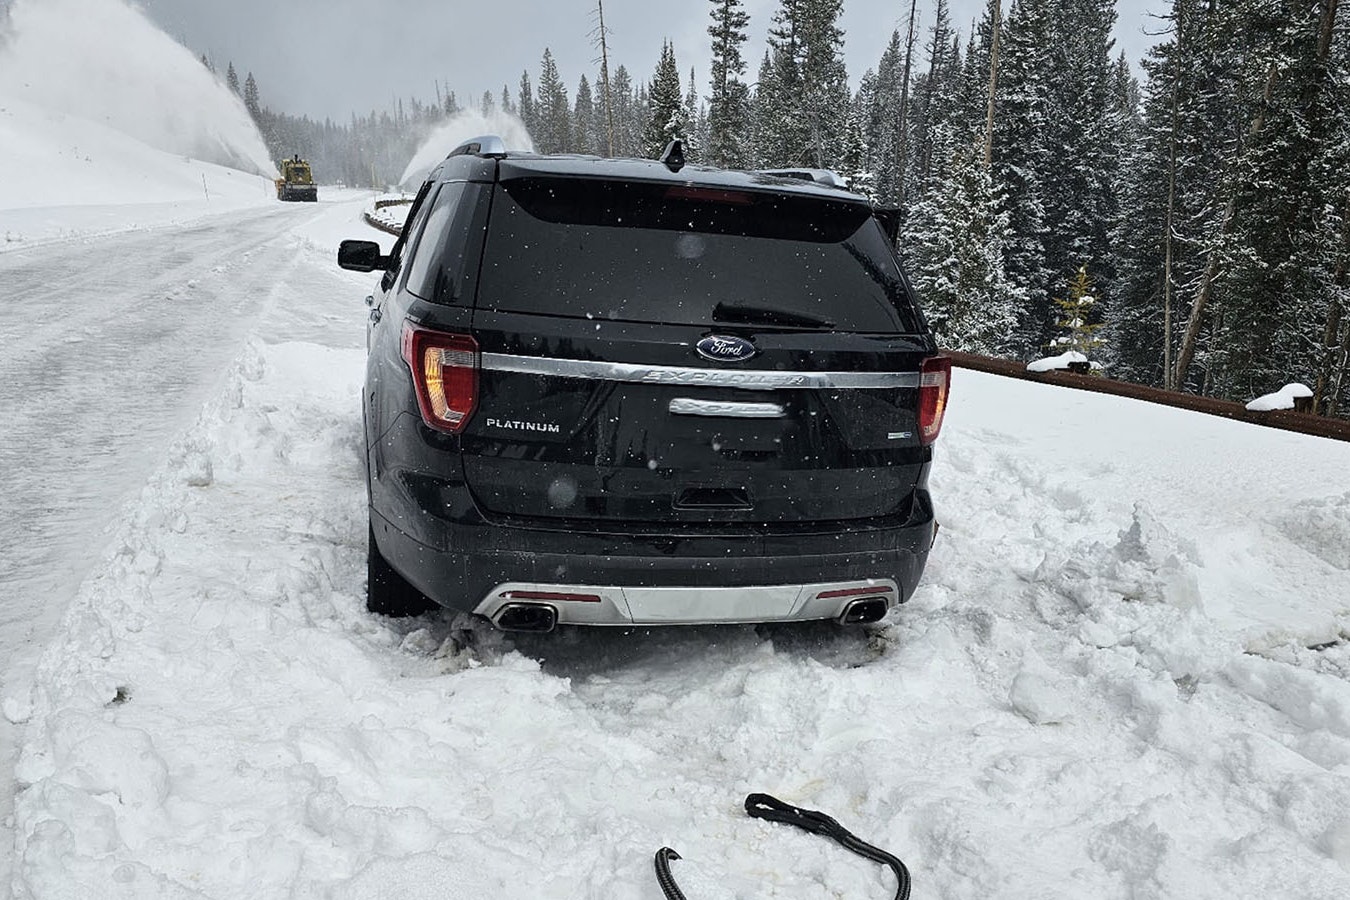 This two-wheel-drive Ford Explorer was stuck for about 10 hours on a snowpacked Highway 212 near Yellowstone overnight Wednesday. The road is still closed for the season, but the driver of the vehicle — visitors to the area — said Google sent them there.